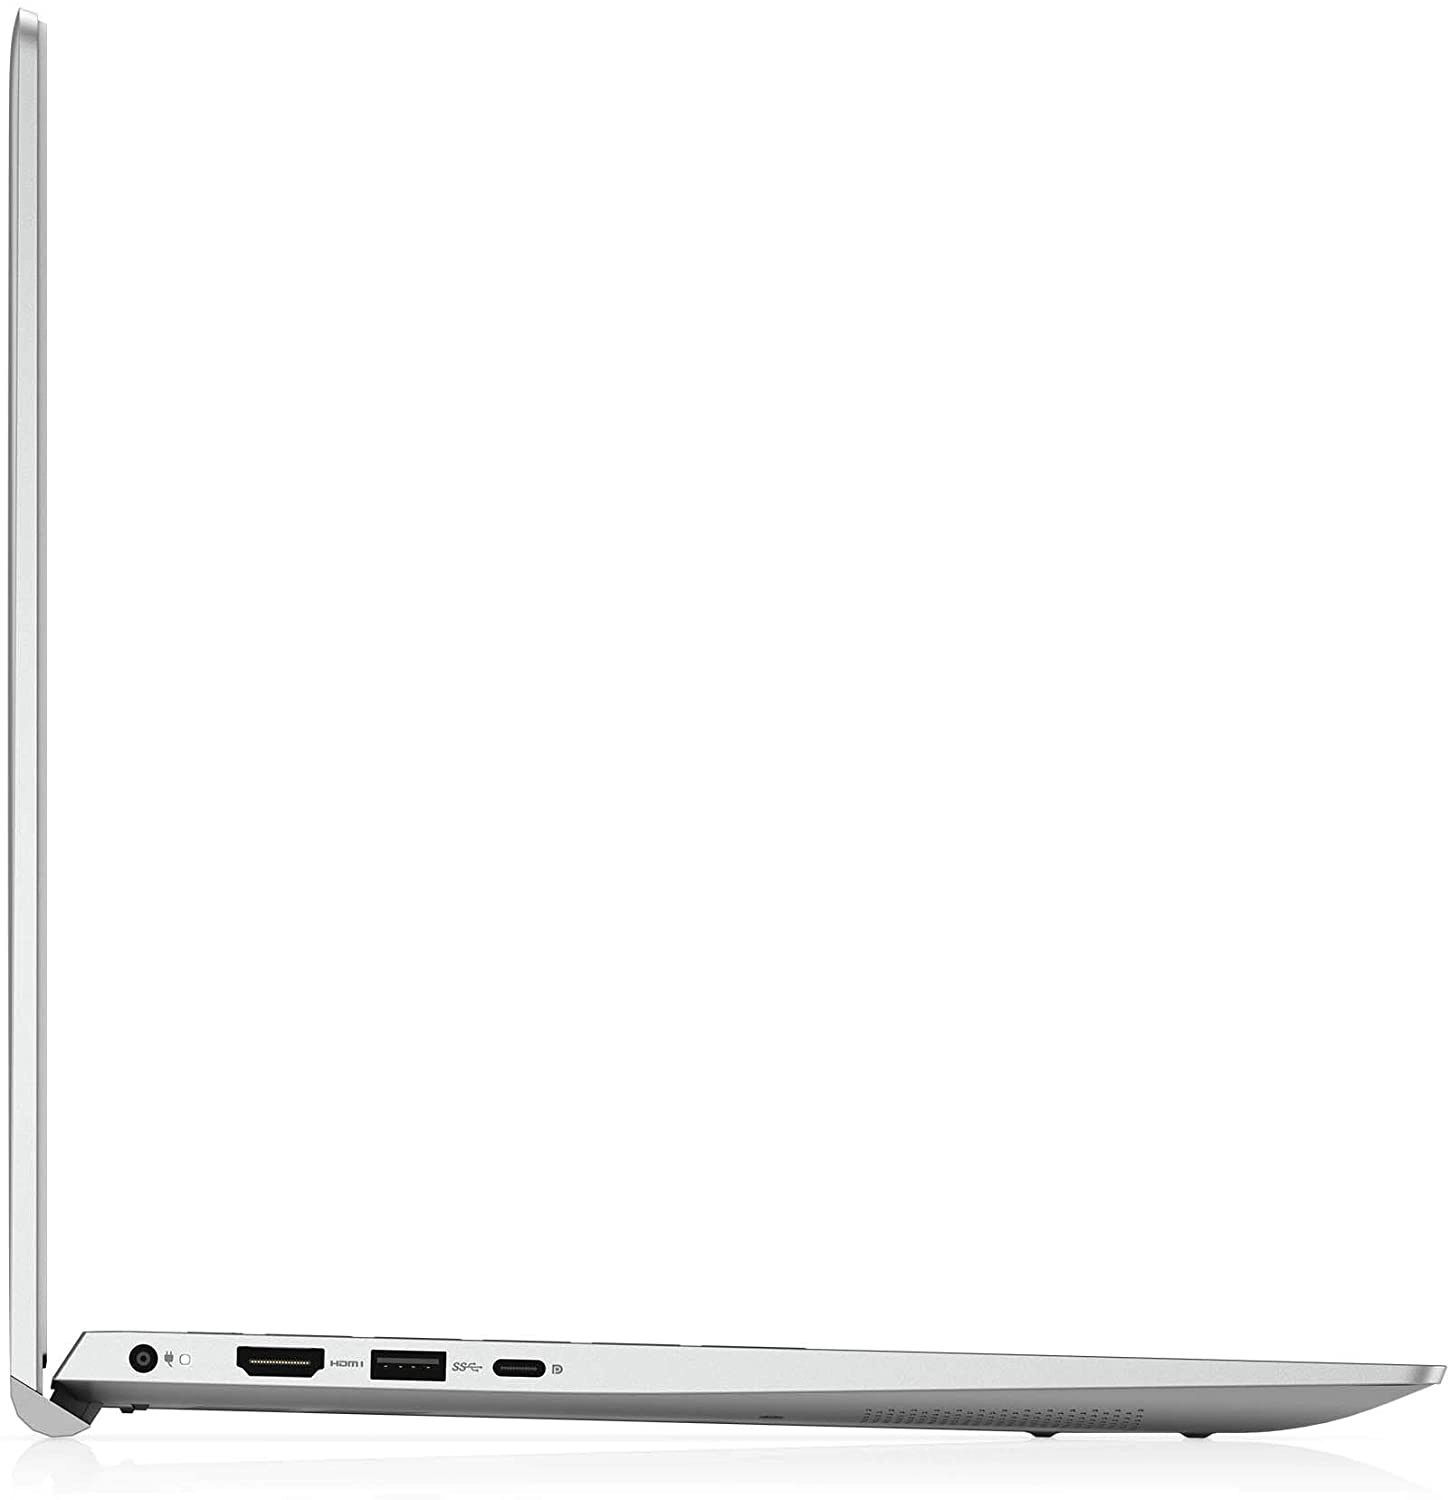 Dell Inspiron 5502 laptop image